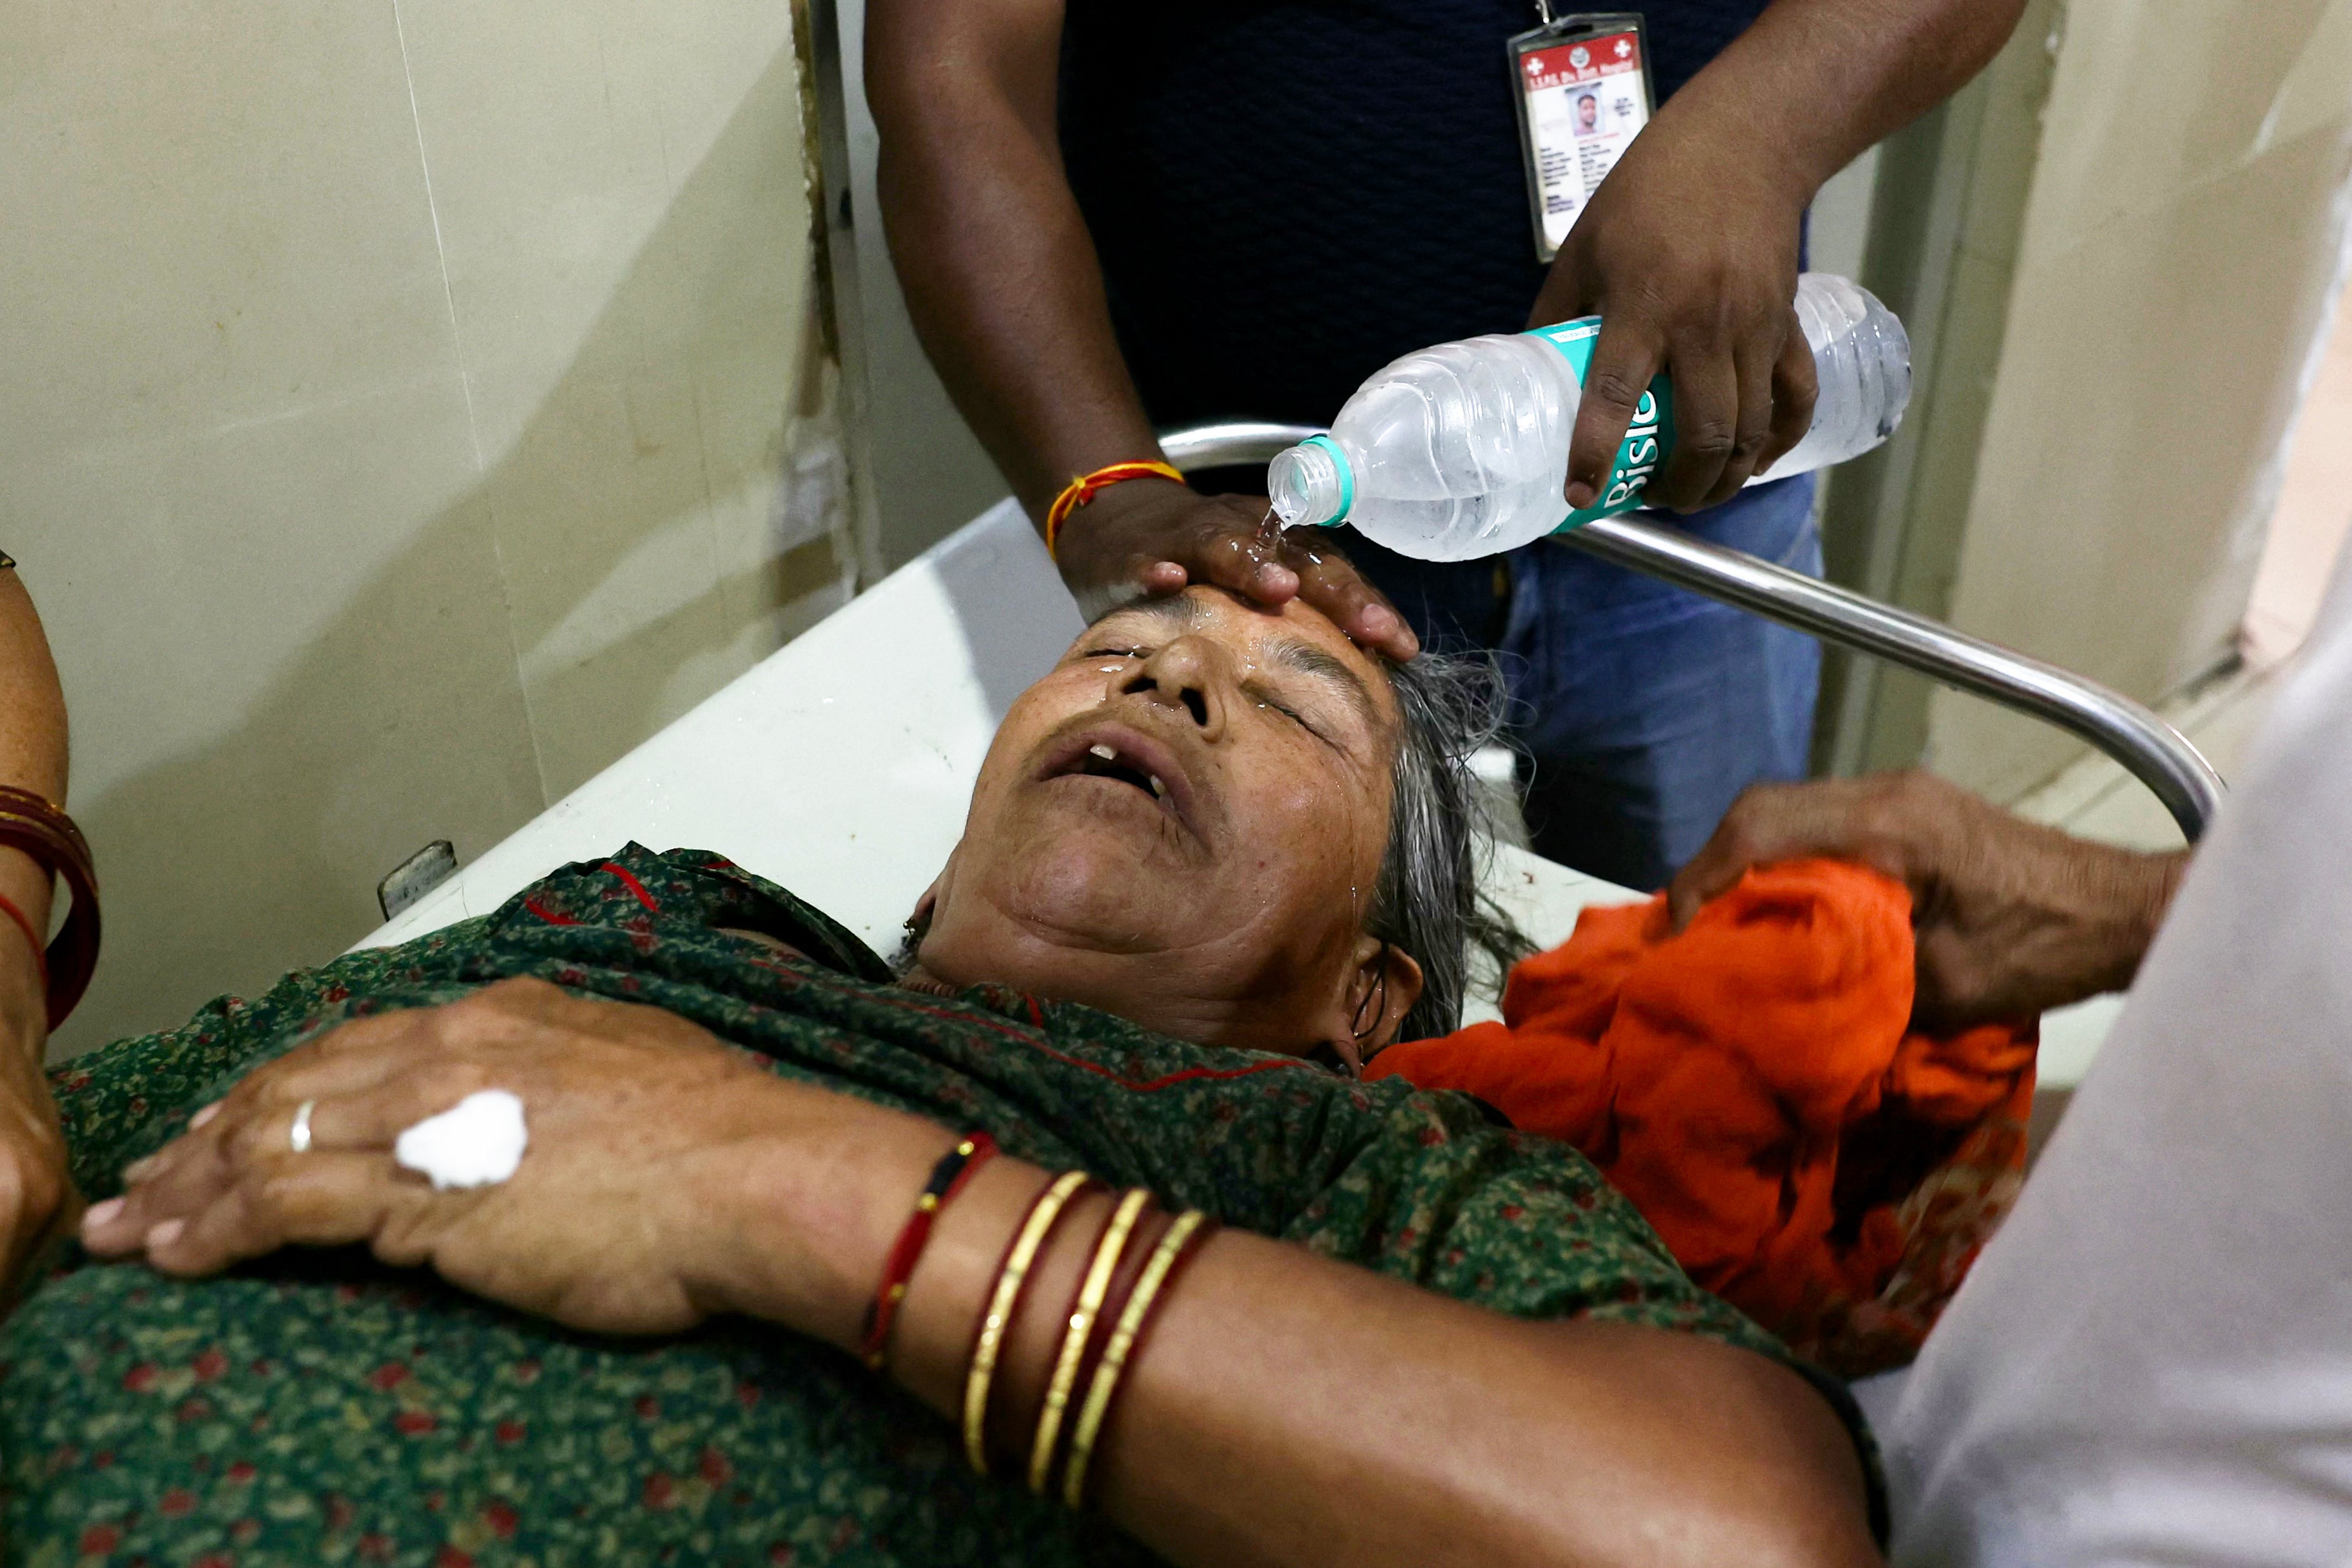 A hospital staff member pours water on the face of a patient suffering from heat stroke at a government hospital during a severe heatwave in Varanasi